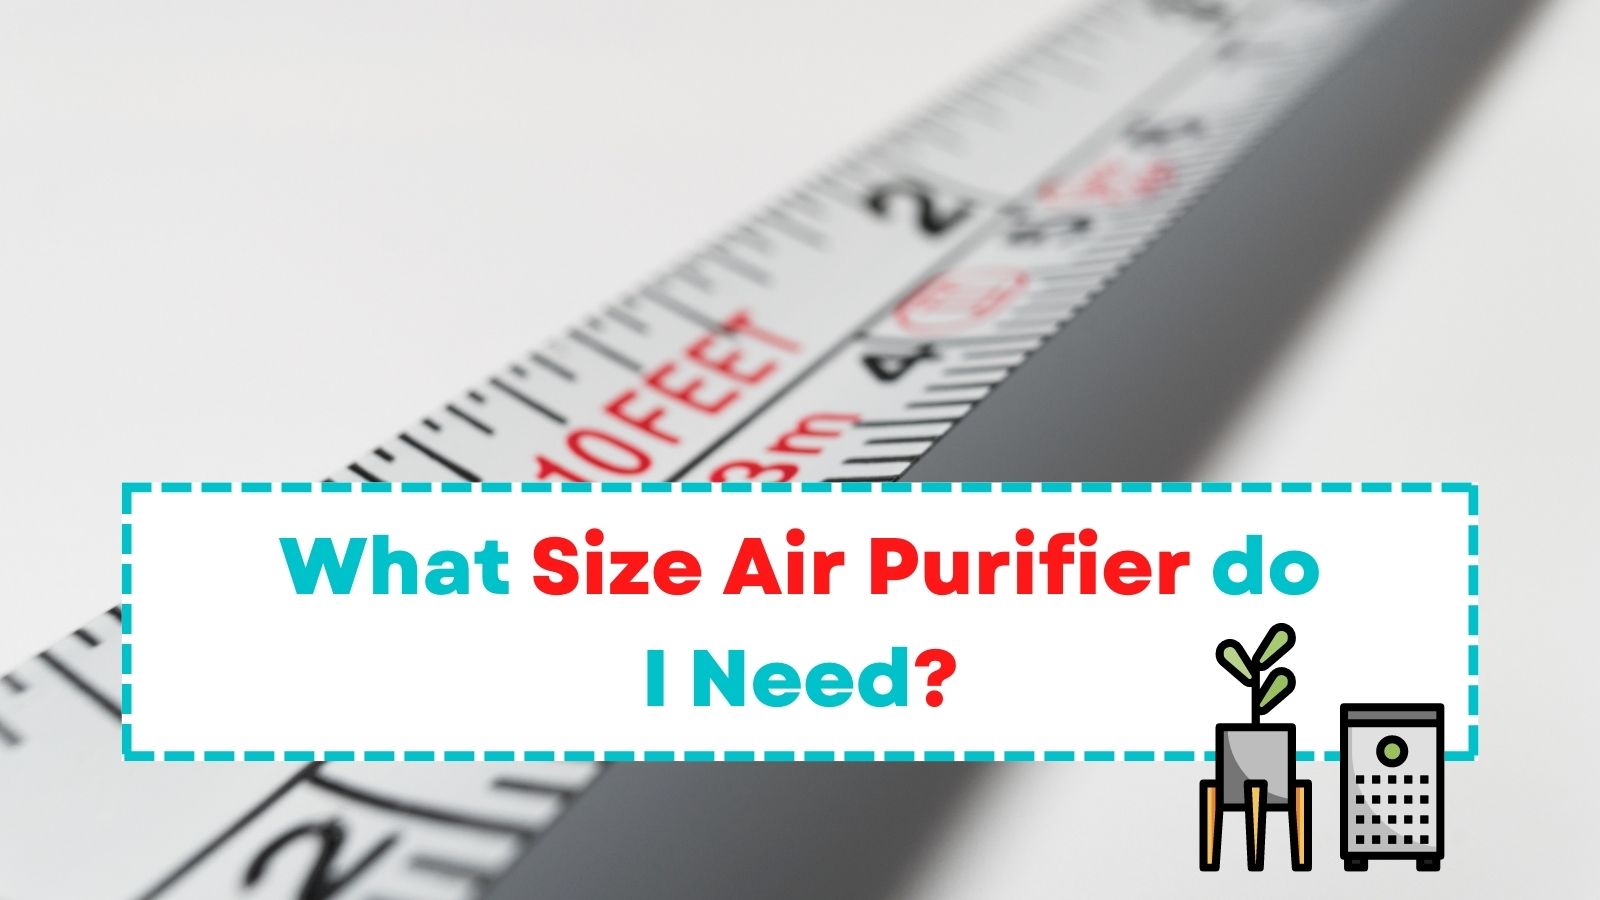 What Size Air Purifier do I Need?